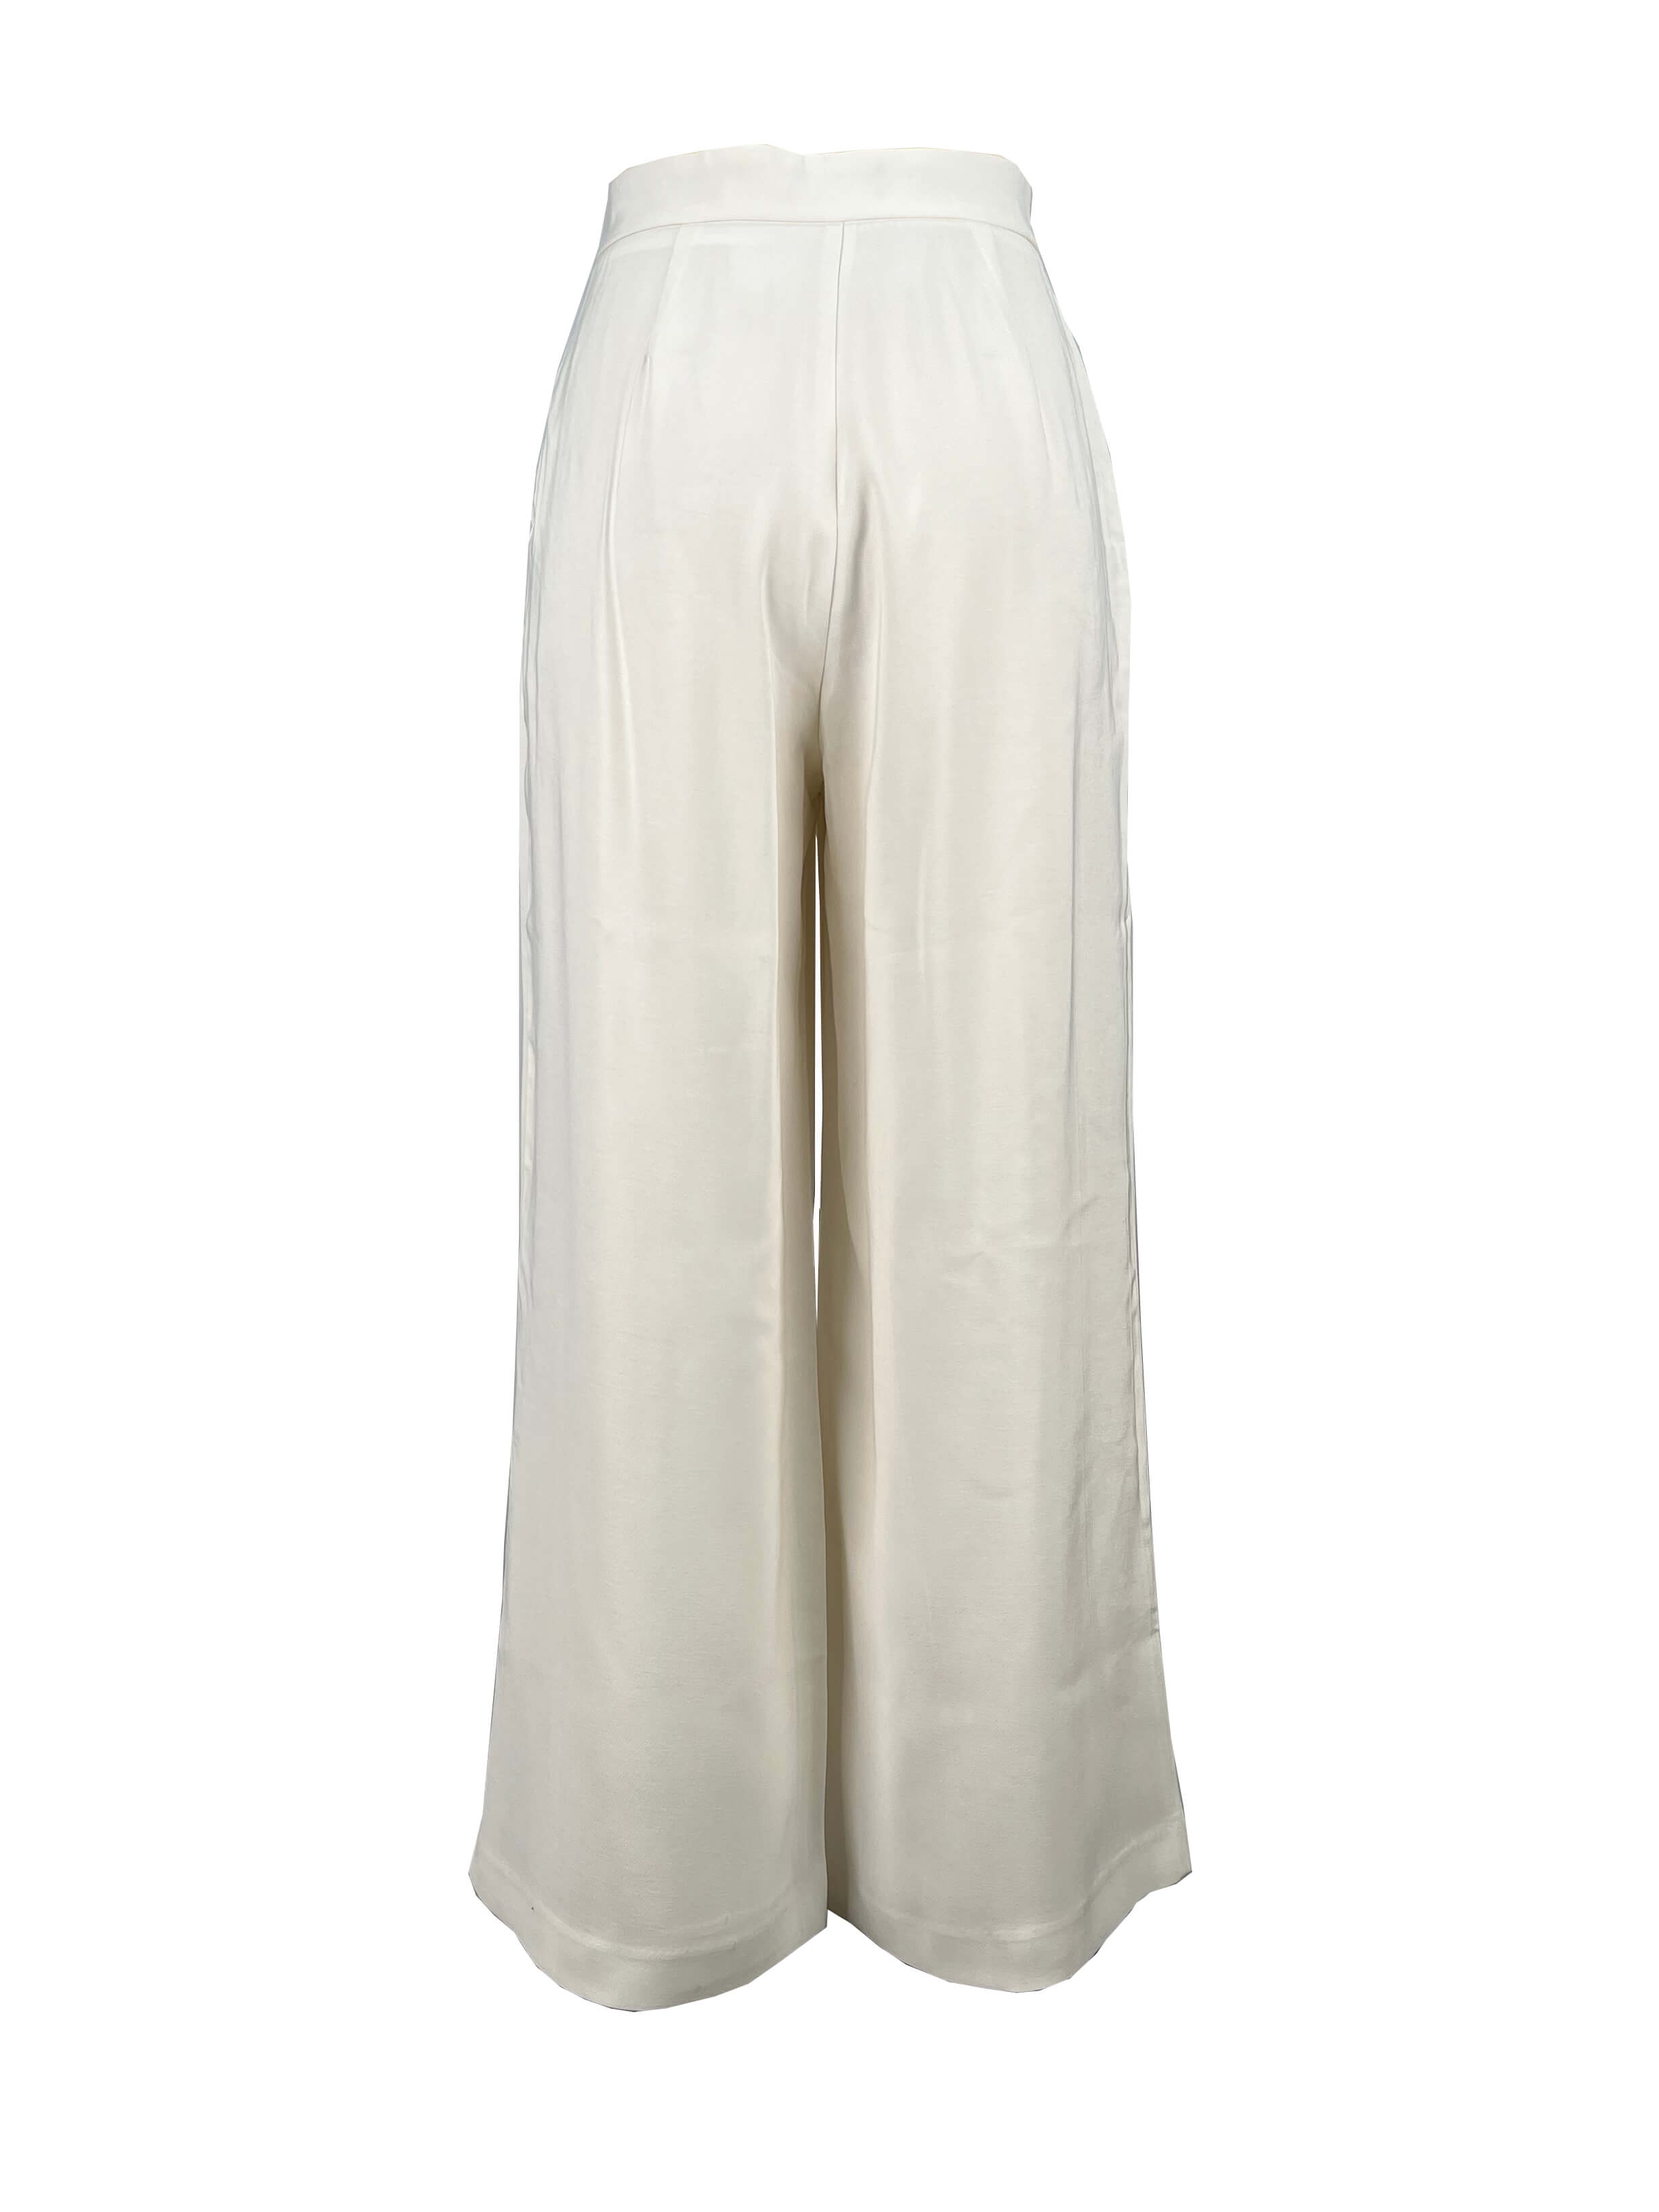 7.trousers (2)